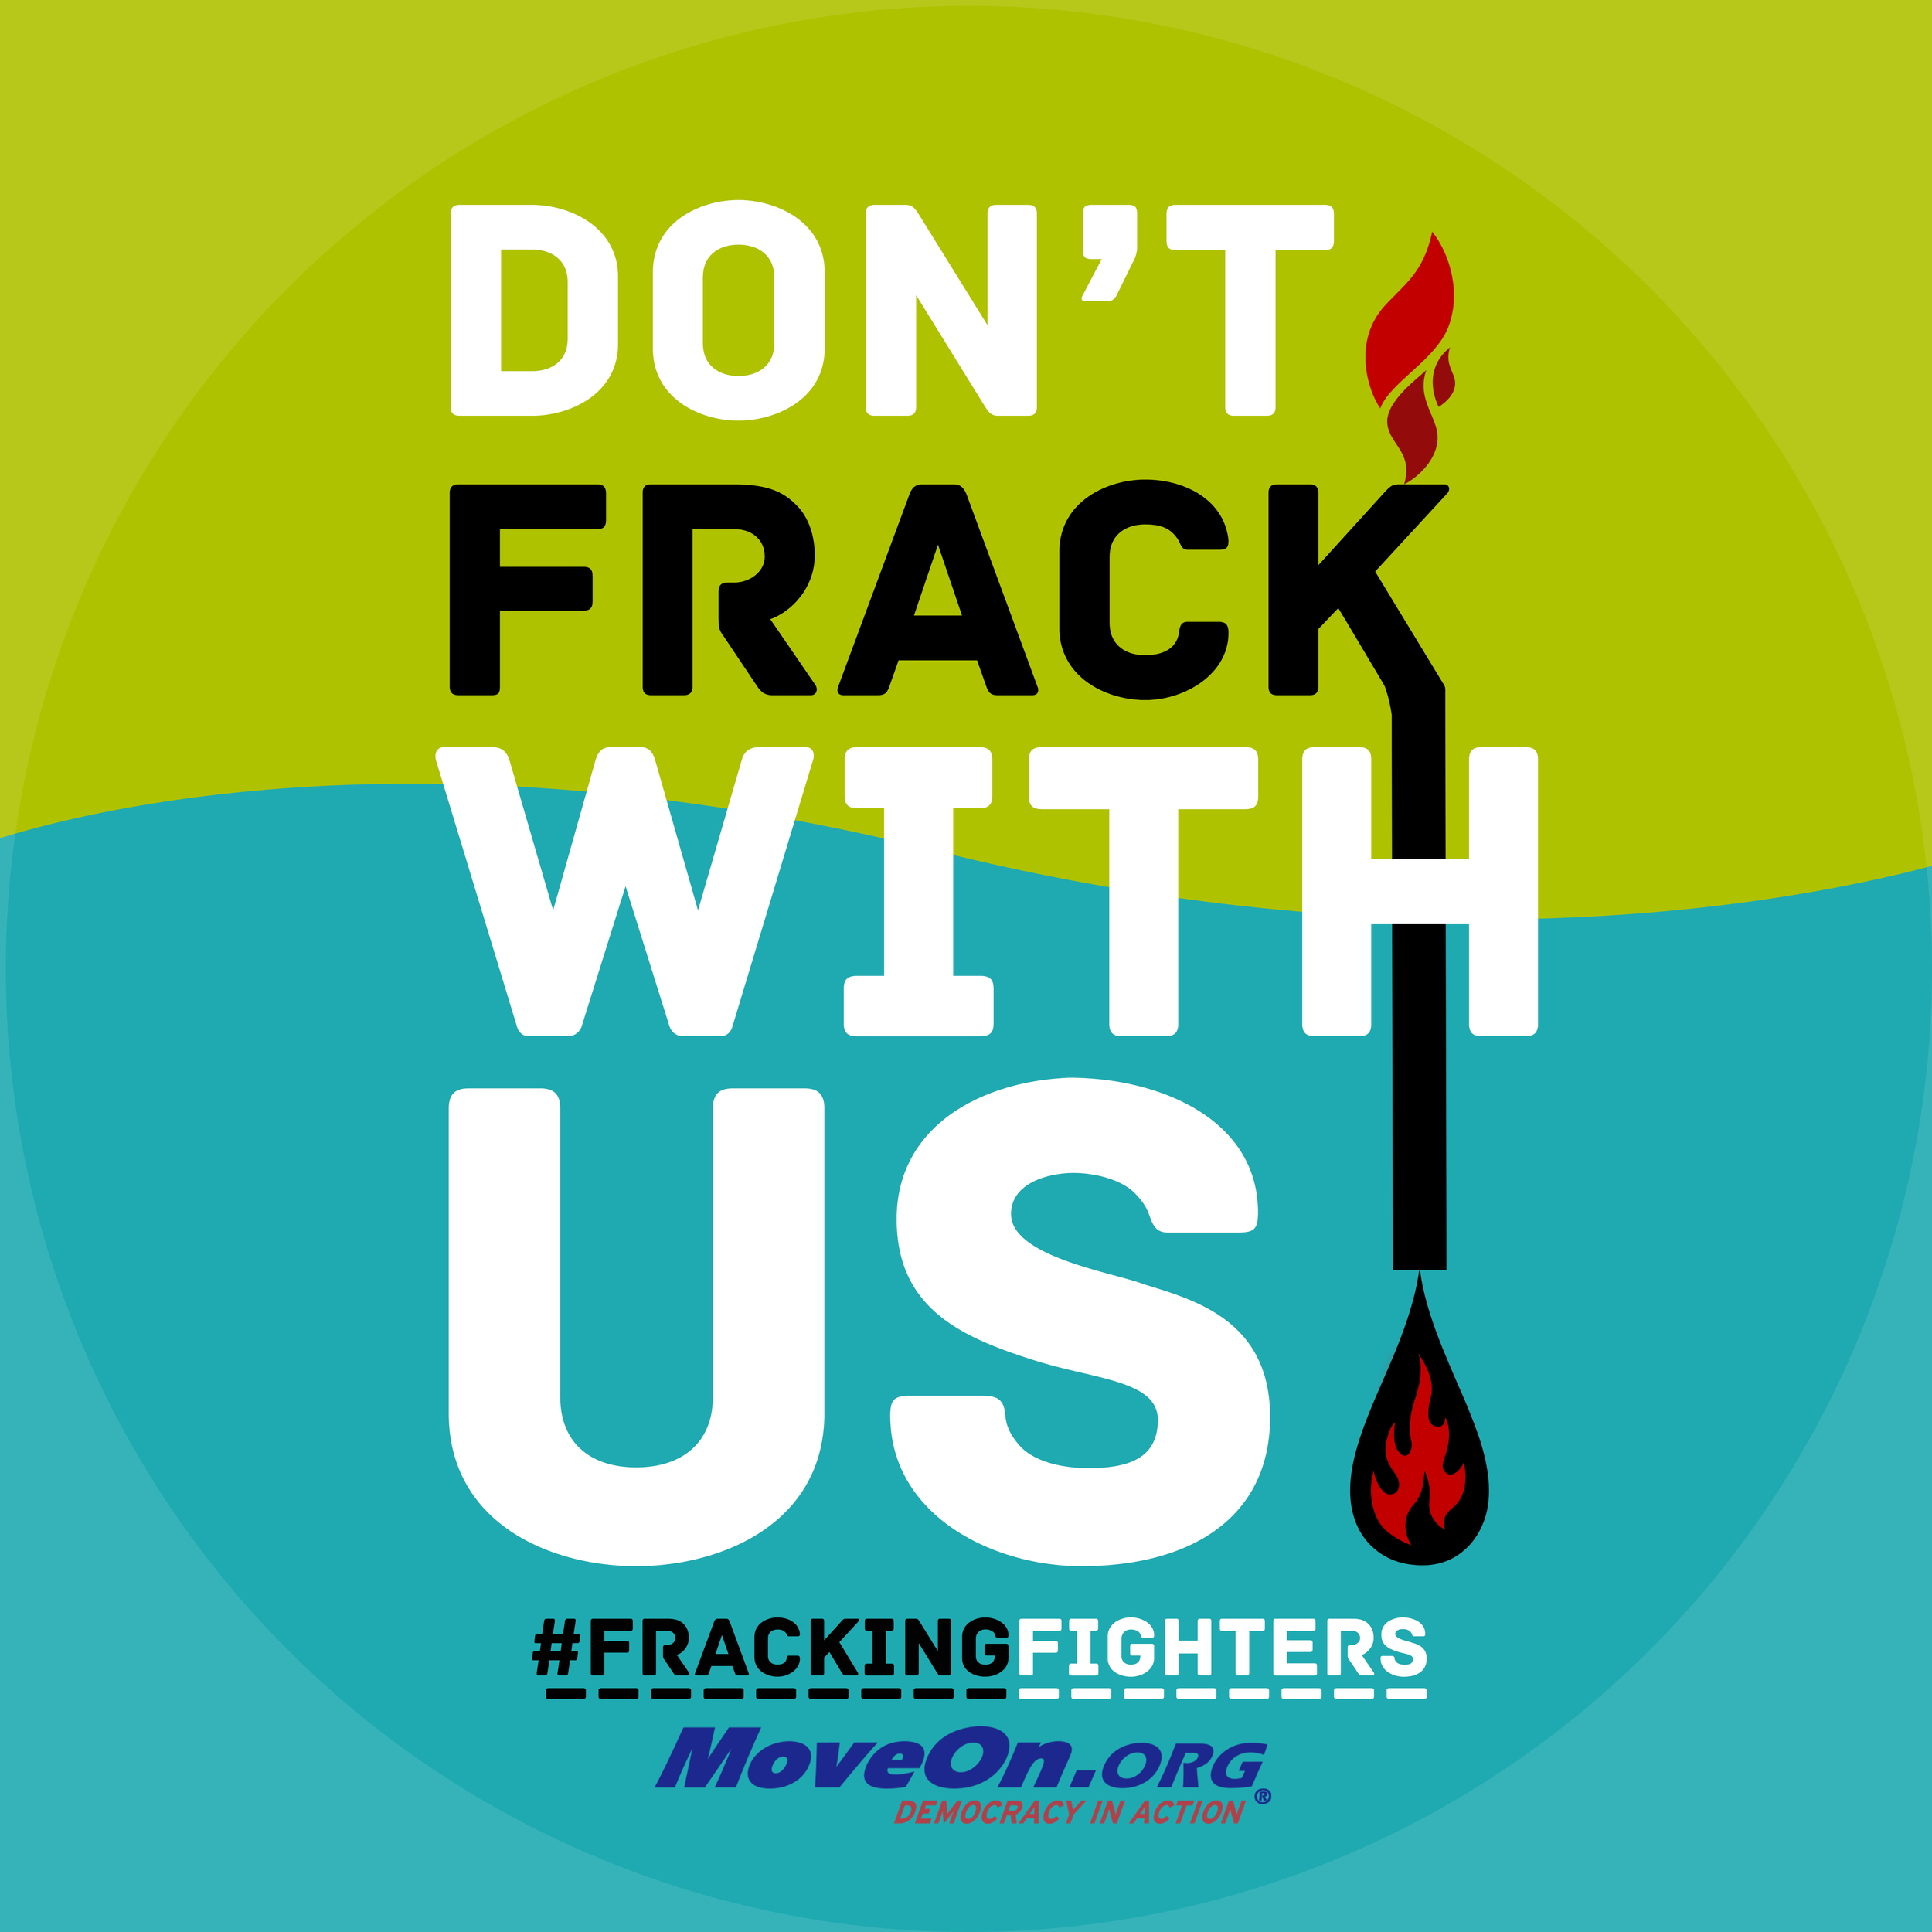 20140106_MoveOn_FrackingFightersSign_BUTTON_V3.1.png